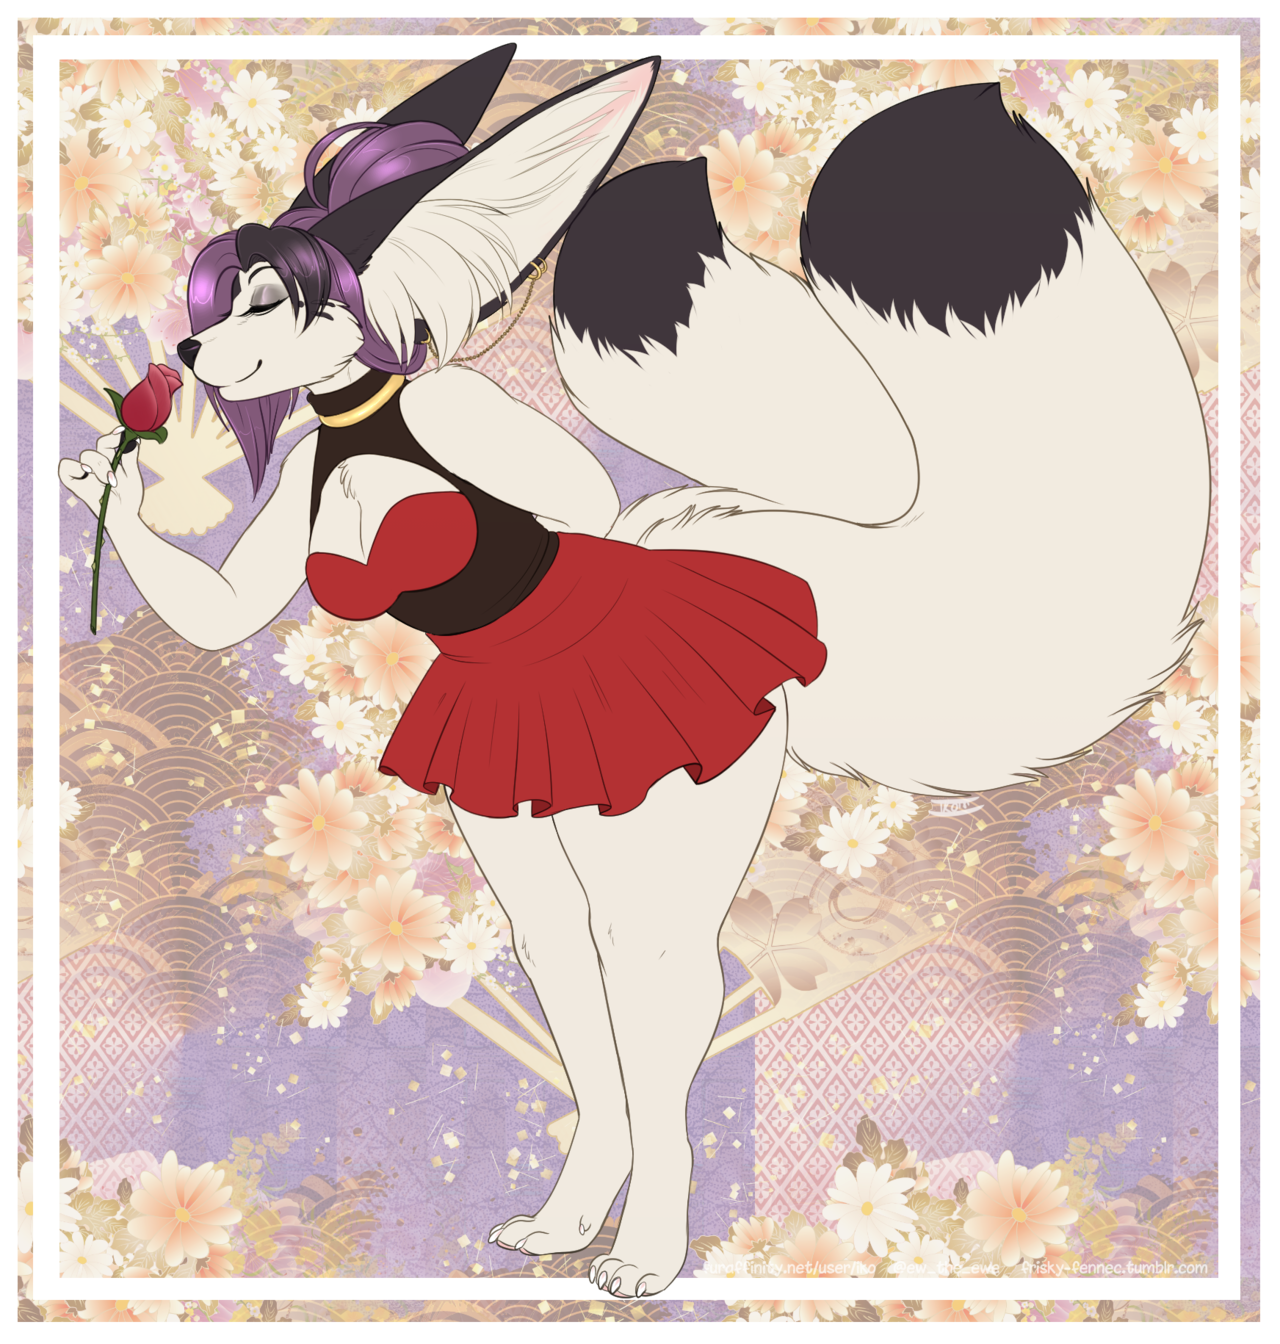 frisky-fennec:   little pic I did of Iko in a valentines day outfit. I haven’t